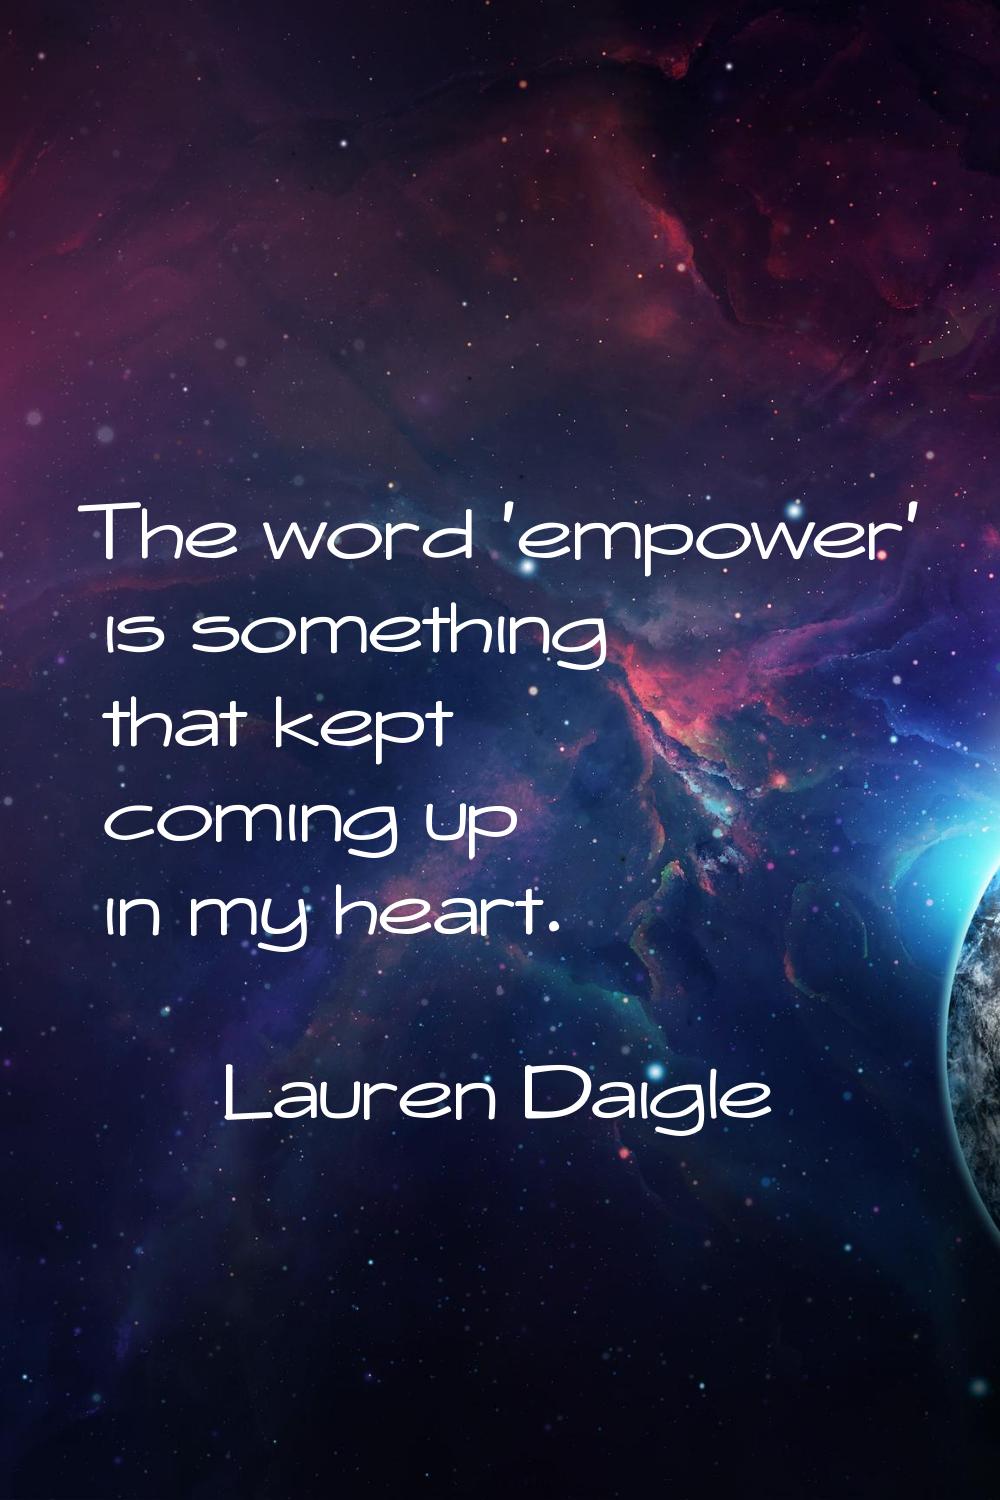 The word 'empower' is something that kept coming up in my heart.